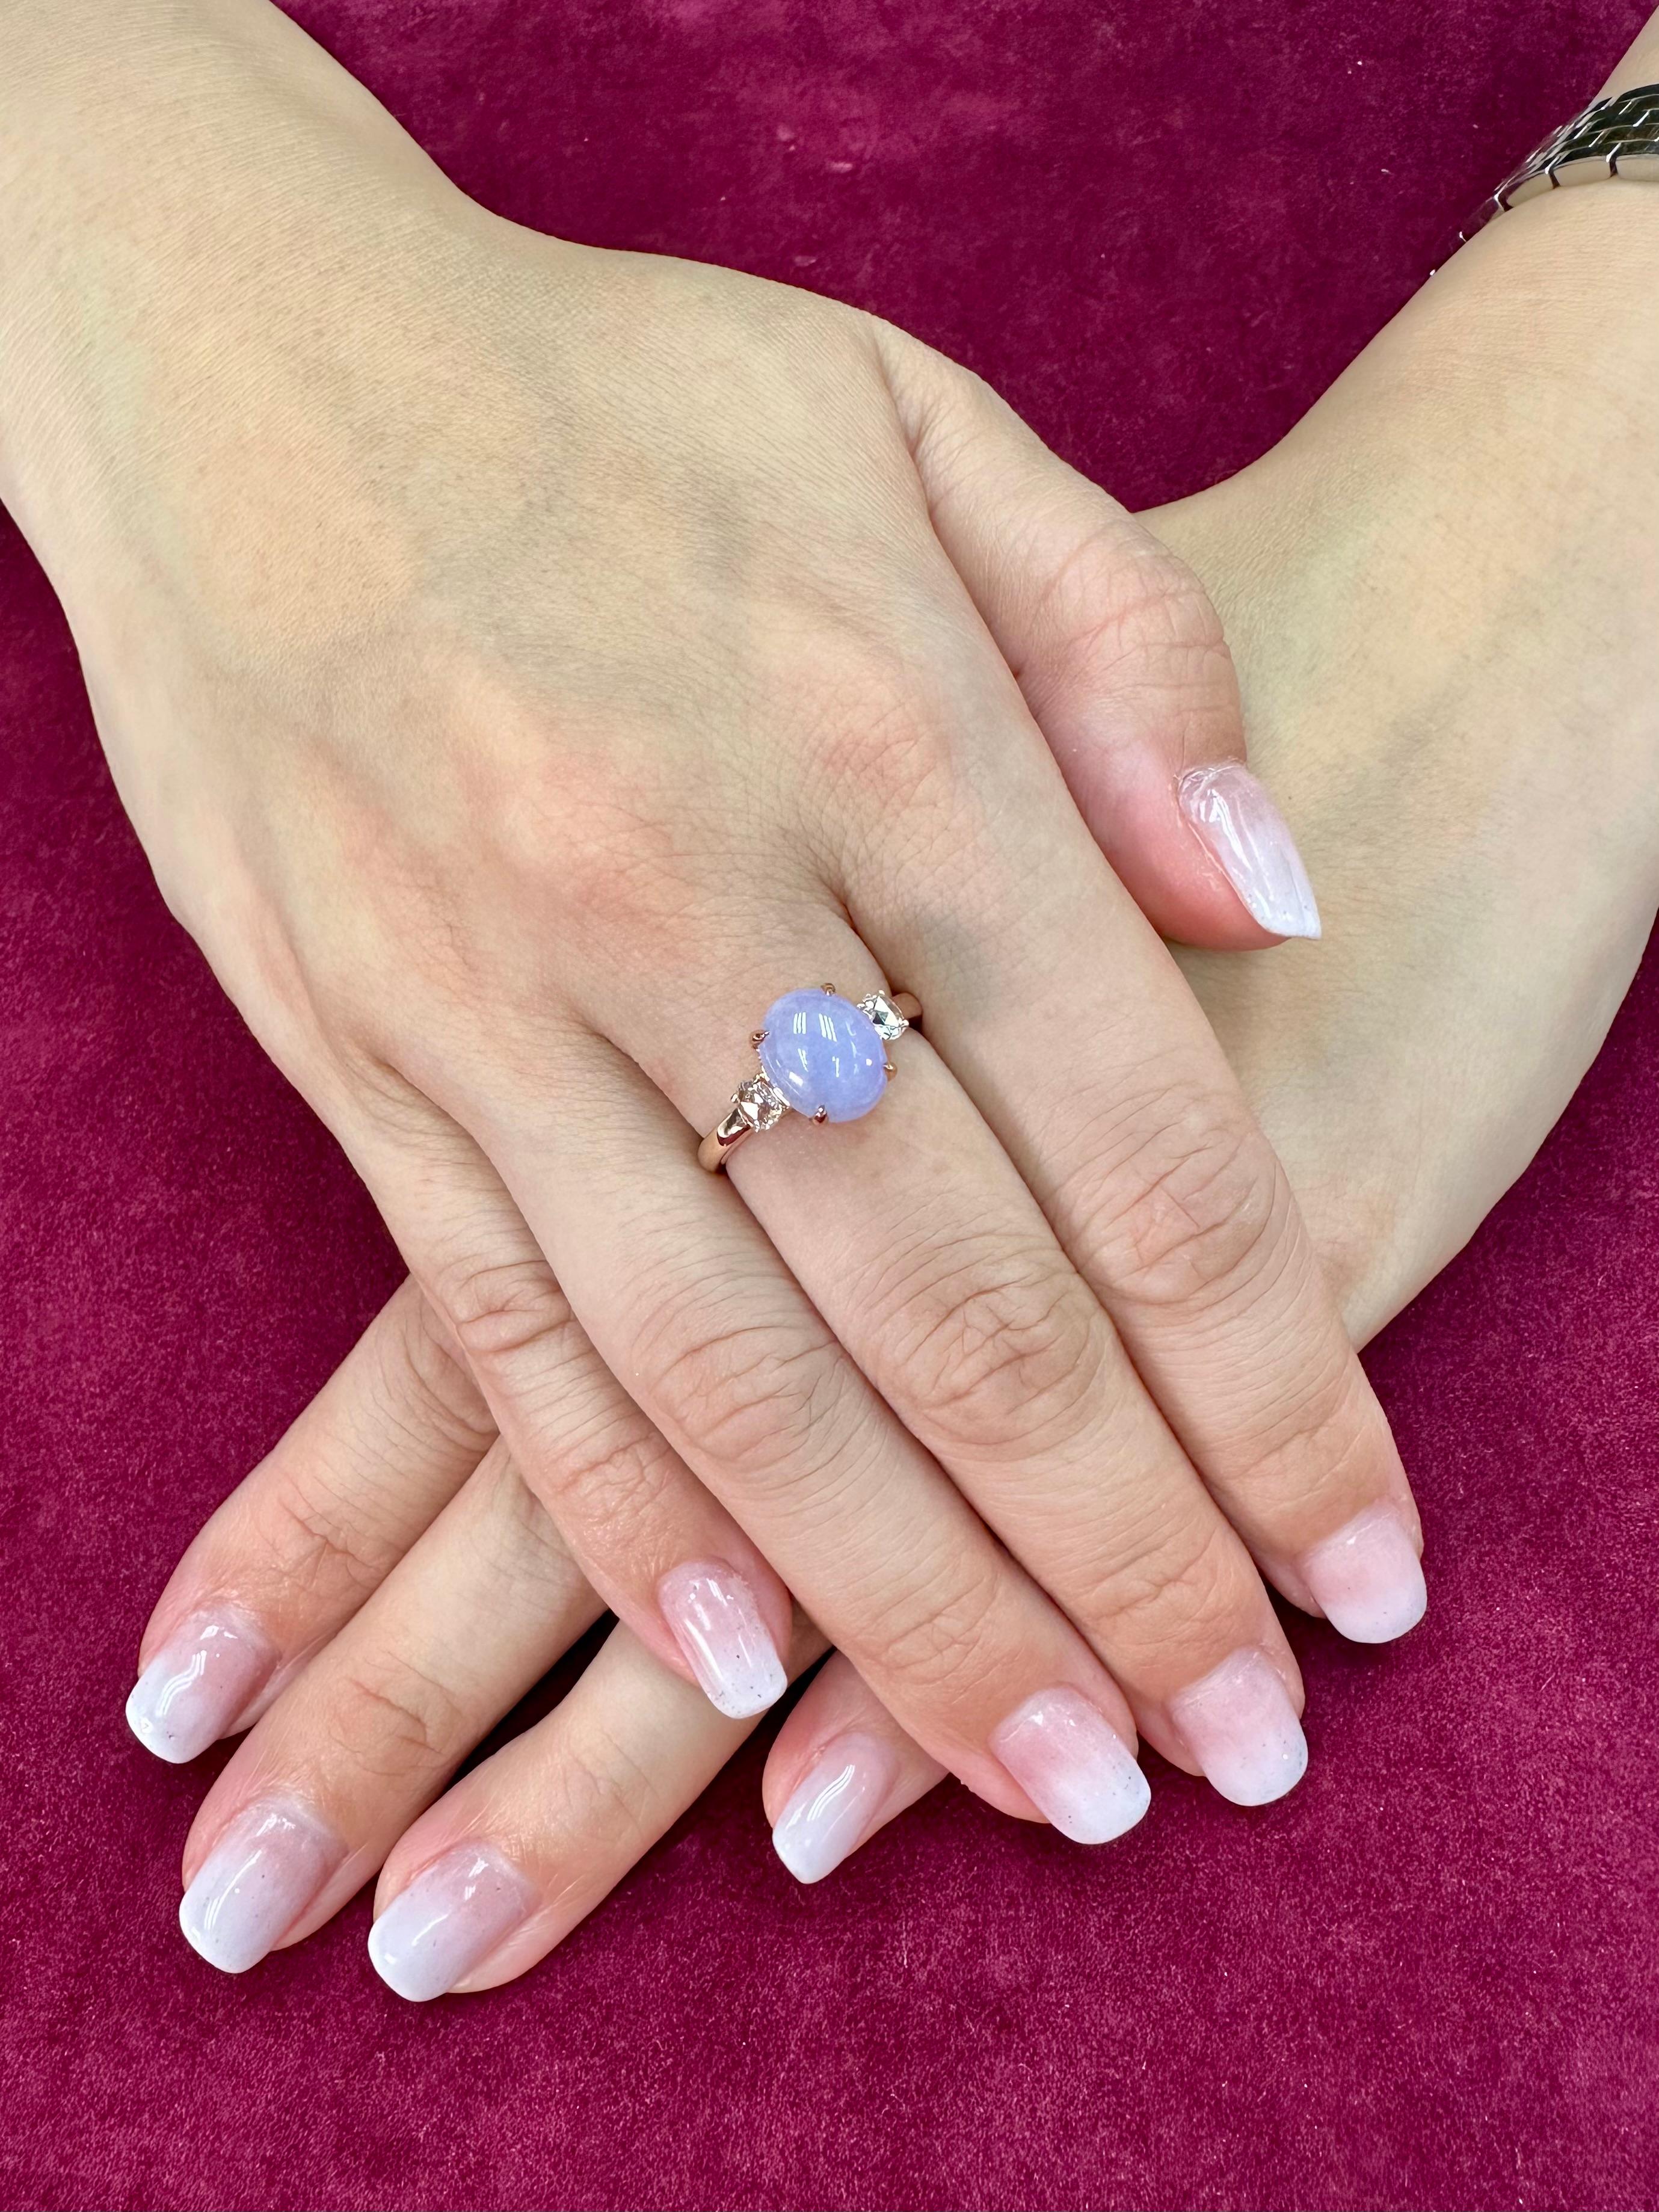 Please check out the HD Video! Here is a very eye pleasing lavender jade and diamond 3 stone ring! It is certified natural jadeite jade. The ring is set in 18k rose gold and diamonds. There are 2 new rose cut diamonds that on each side of the jade